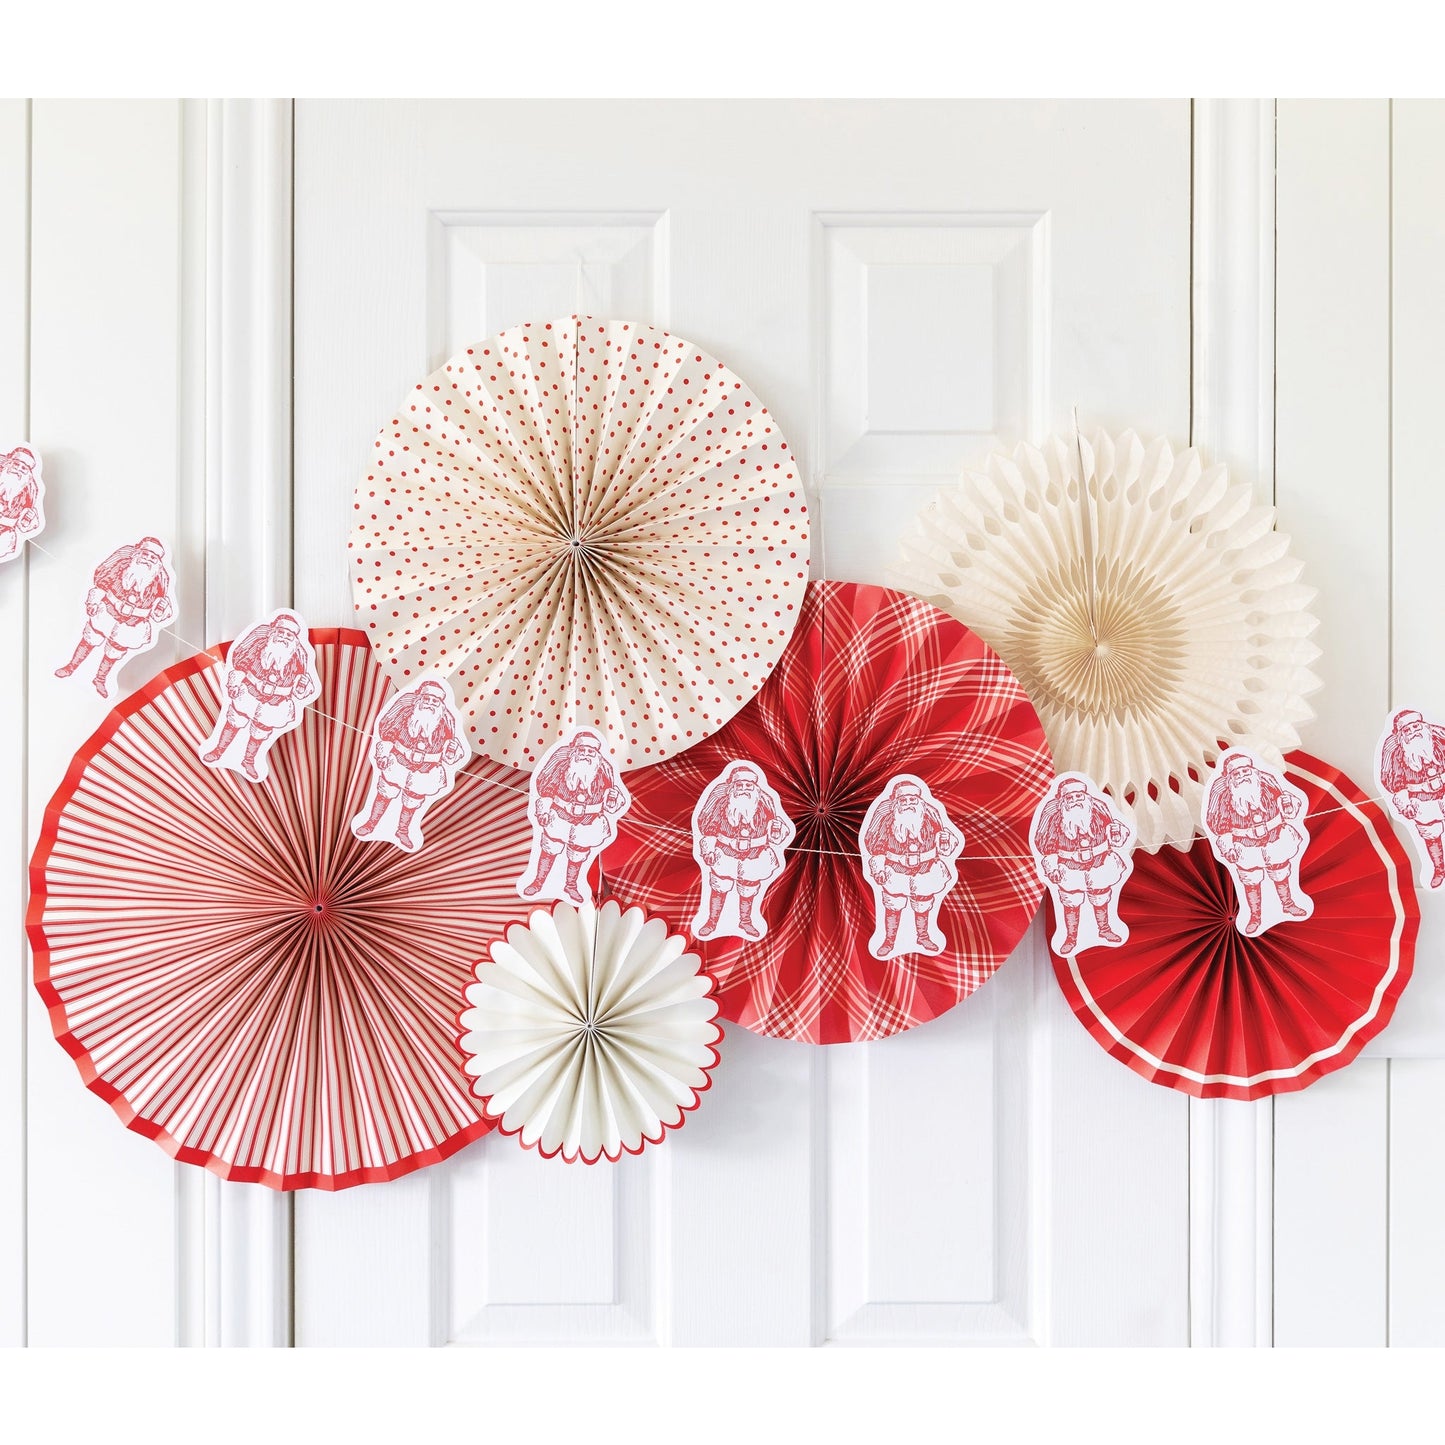 Red and Cream "Believe" Party Fans (set of 6)